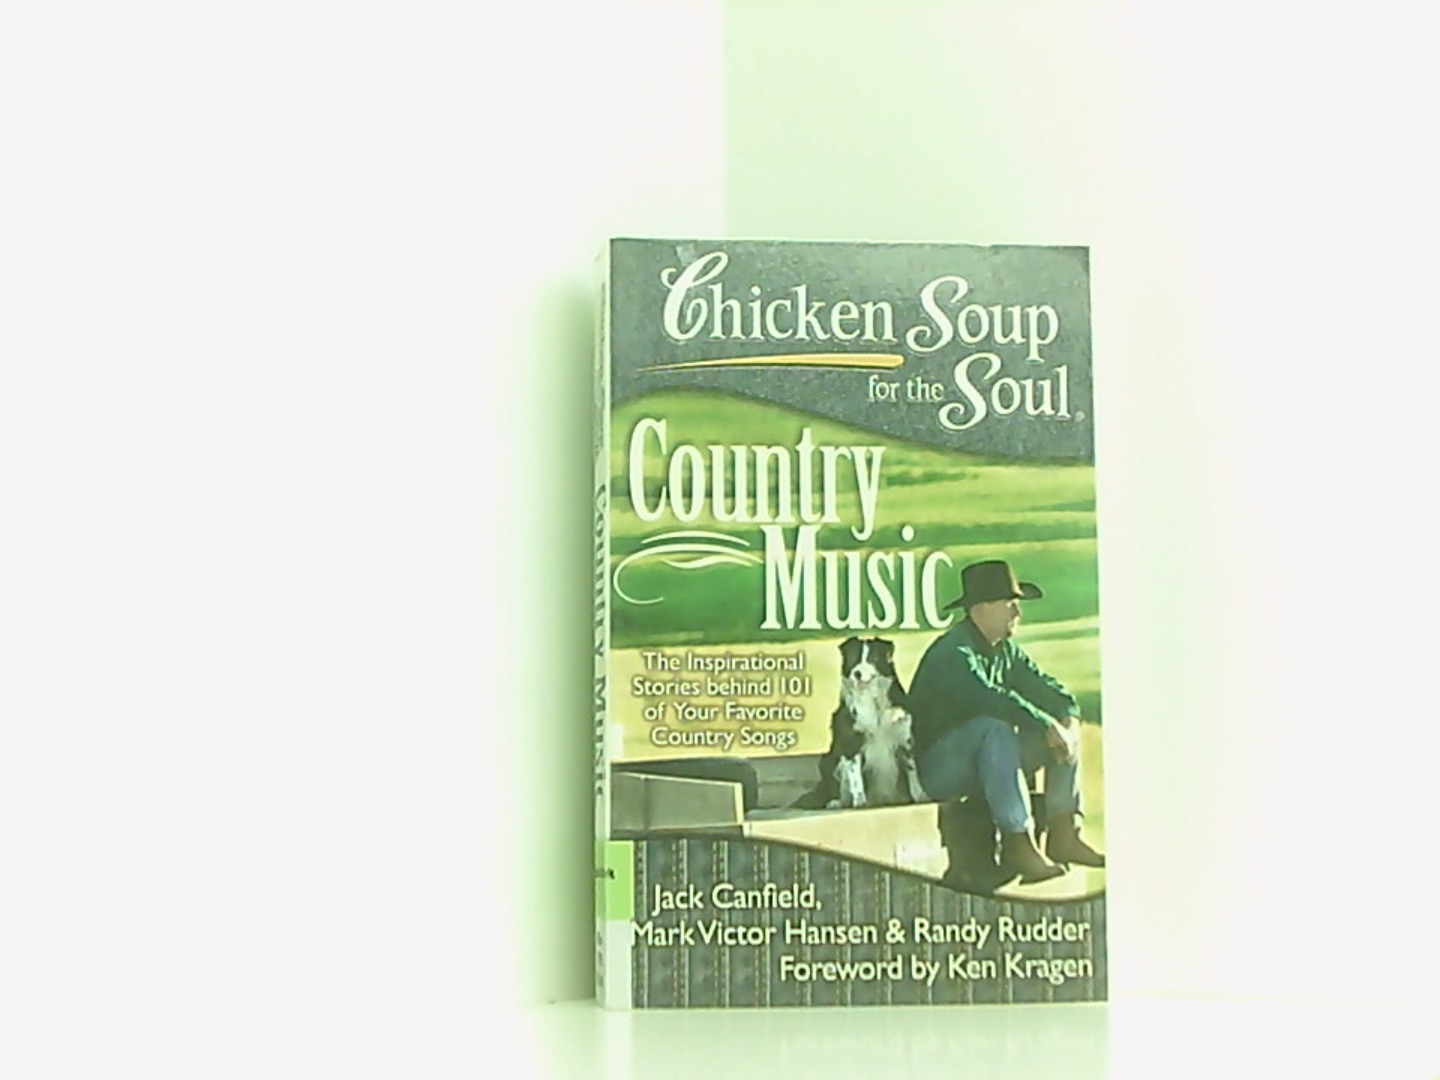 Chicken Soup for the Soul: Country Music: The Inspirational Stories behind 101 of Your Favorite Country Songs - Canfield, Jack, Victor Hansen Mark und Randy Rudder